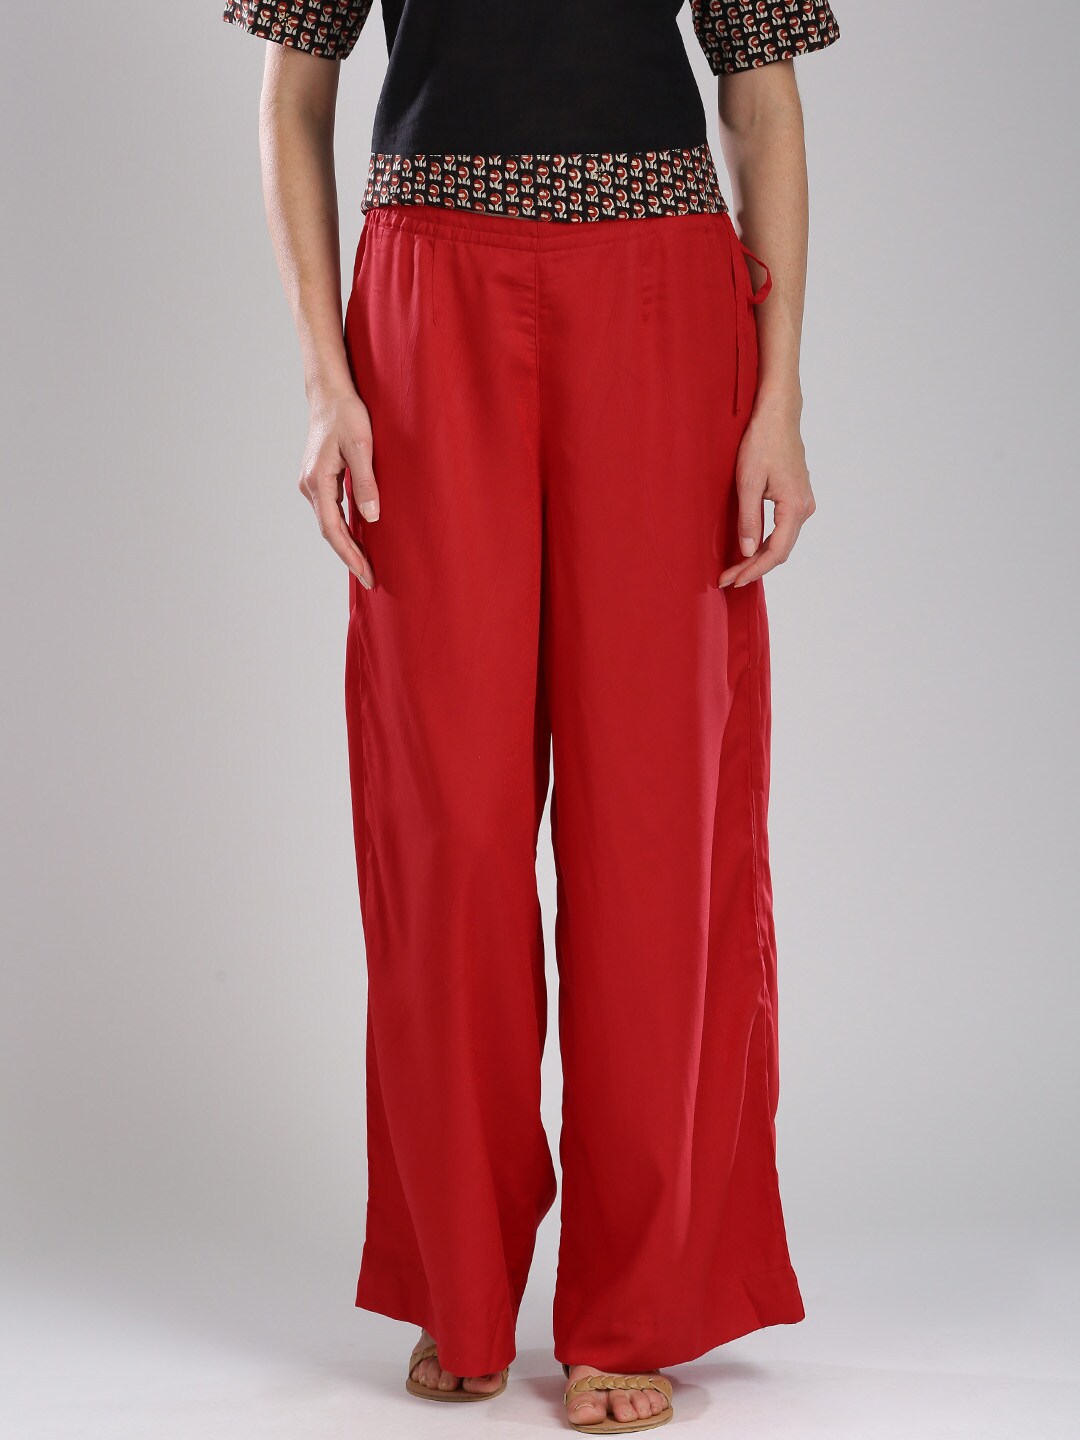 Fabindia Women Red Solid Palazzo Trousers Price in India